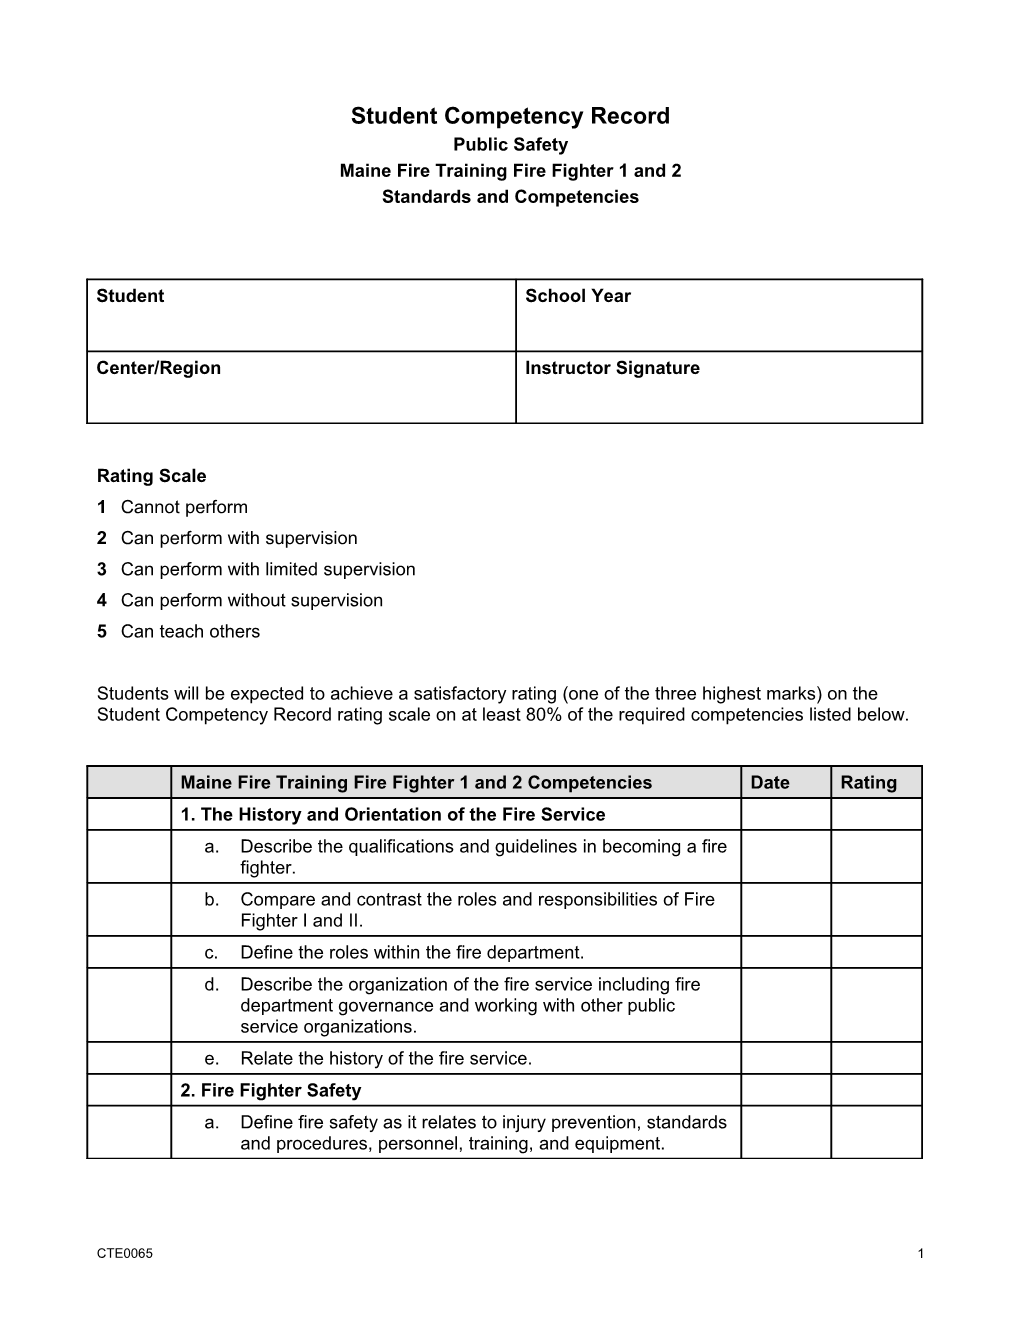 Student Competency Record s1